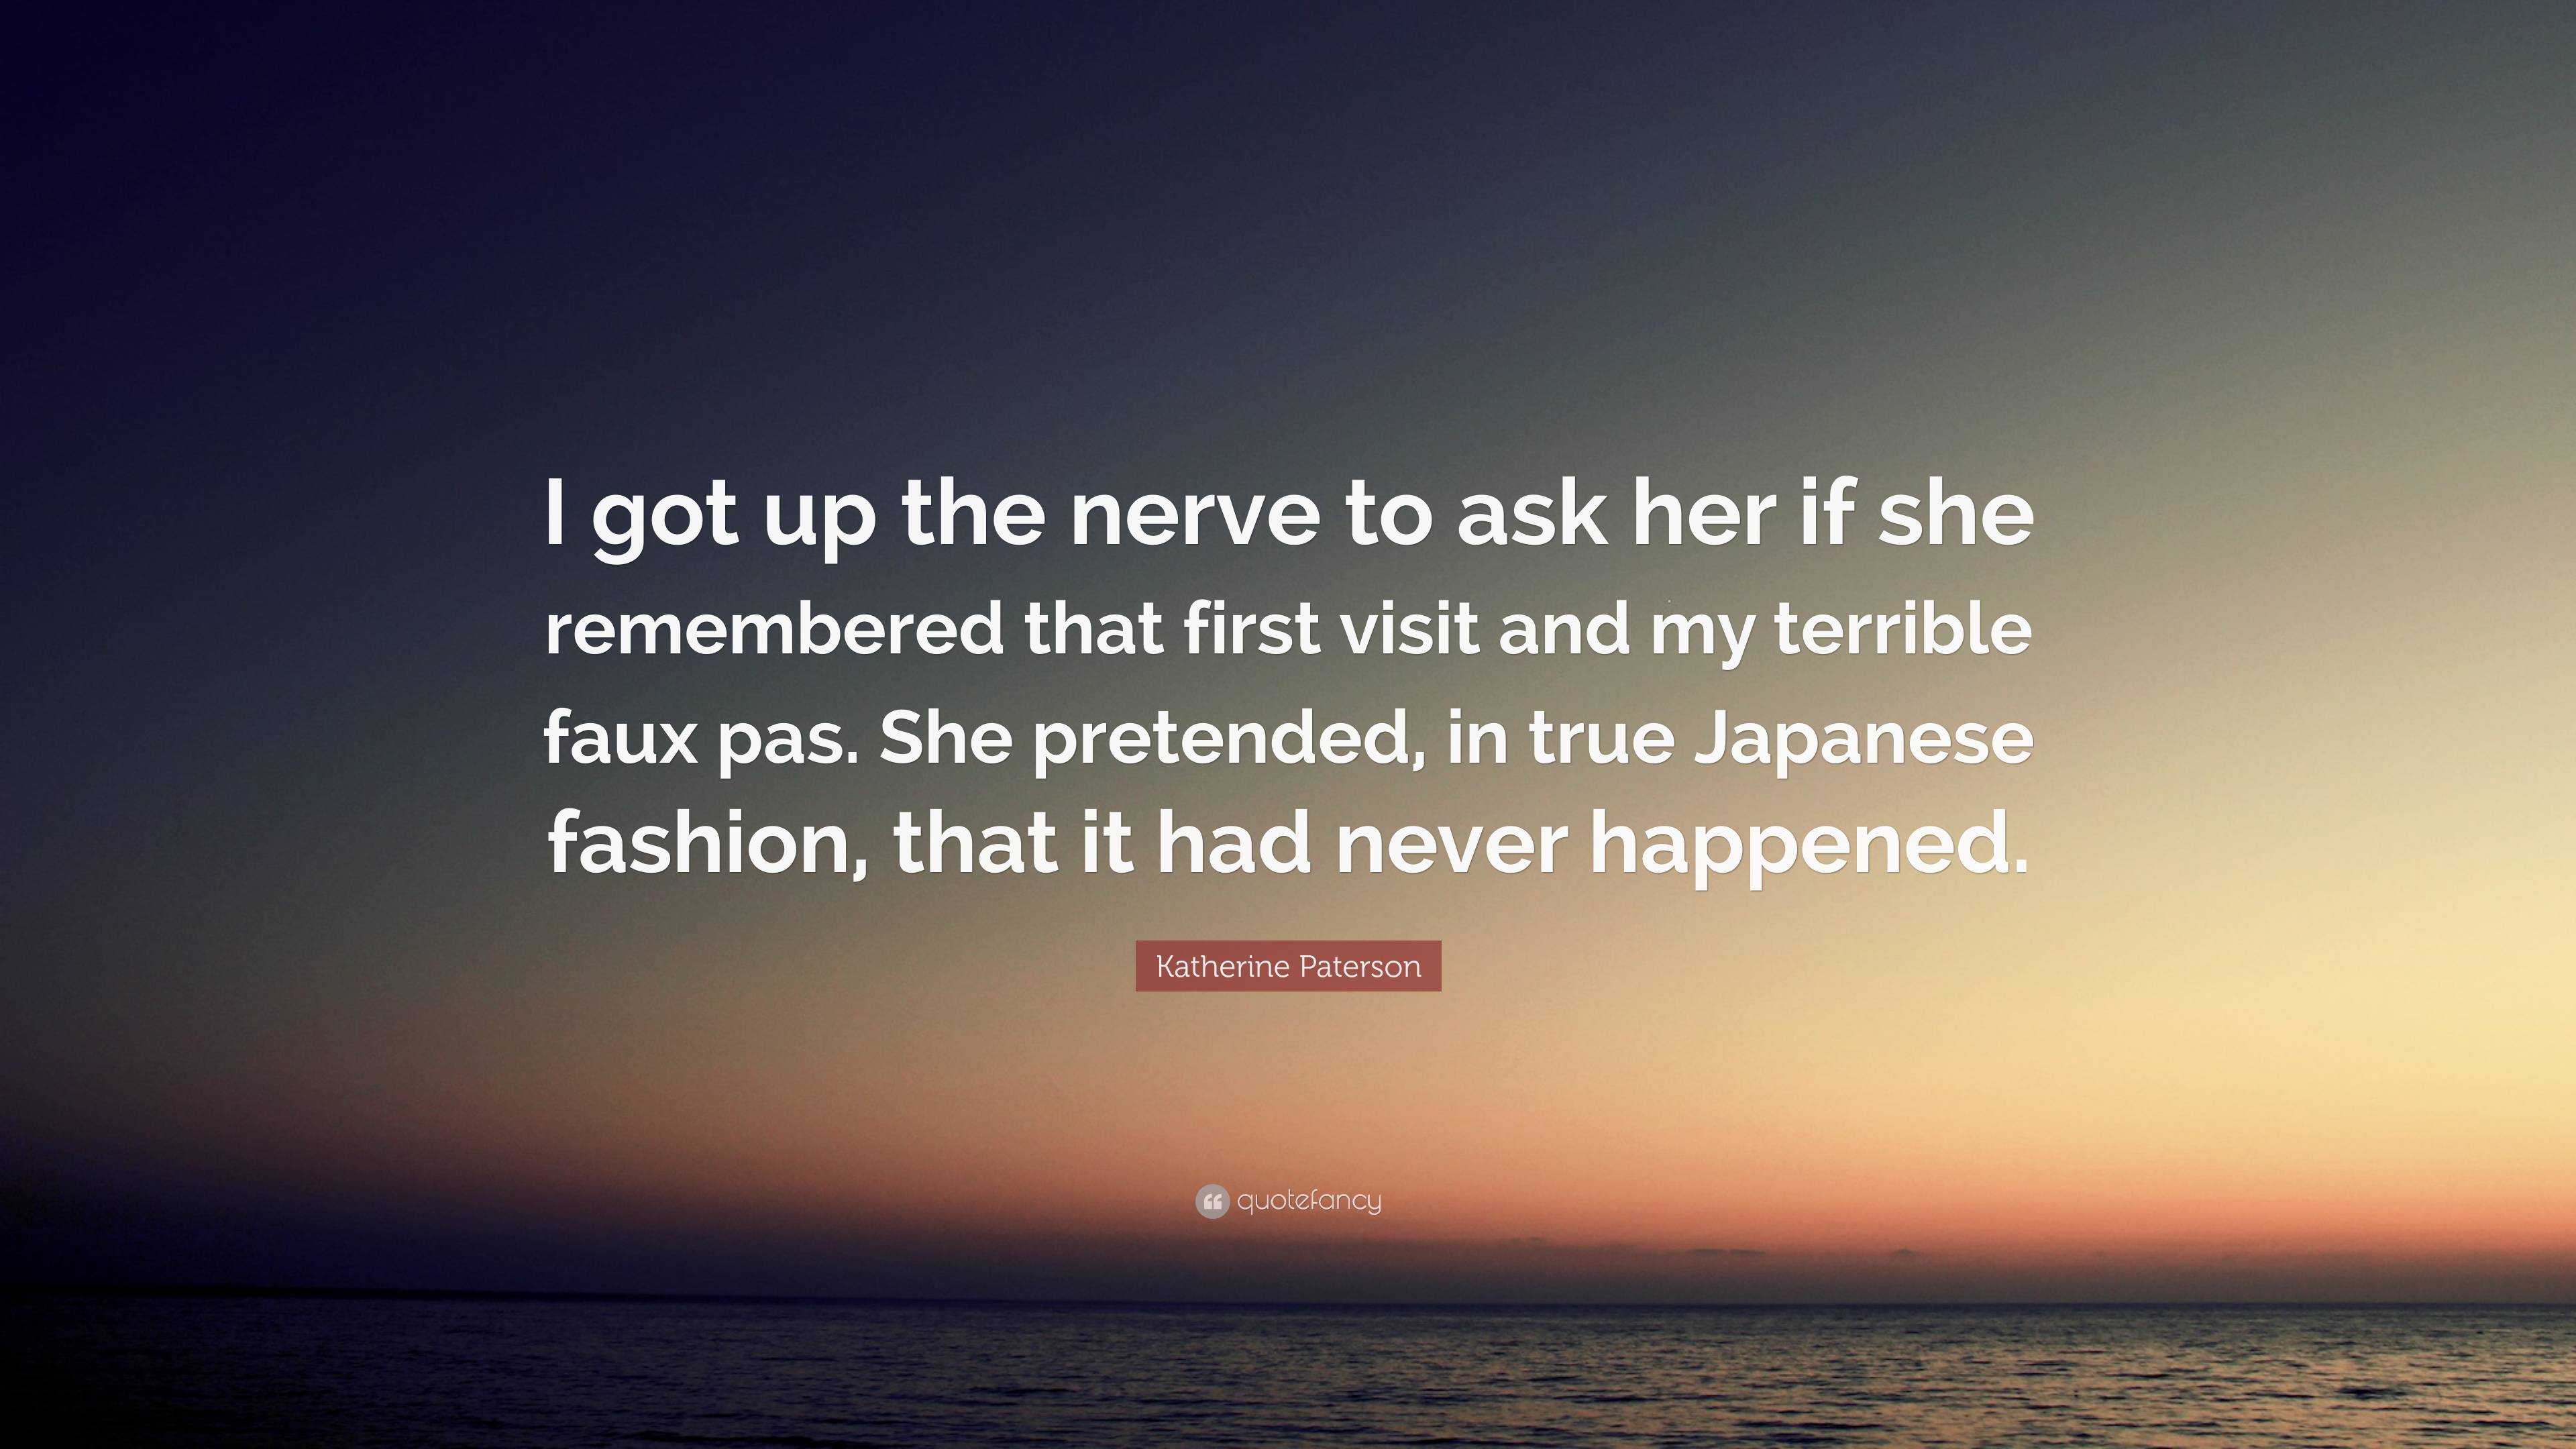 Katherine Paterson Quote: “I got up the nerve to ask her if she ...